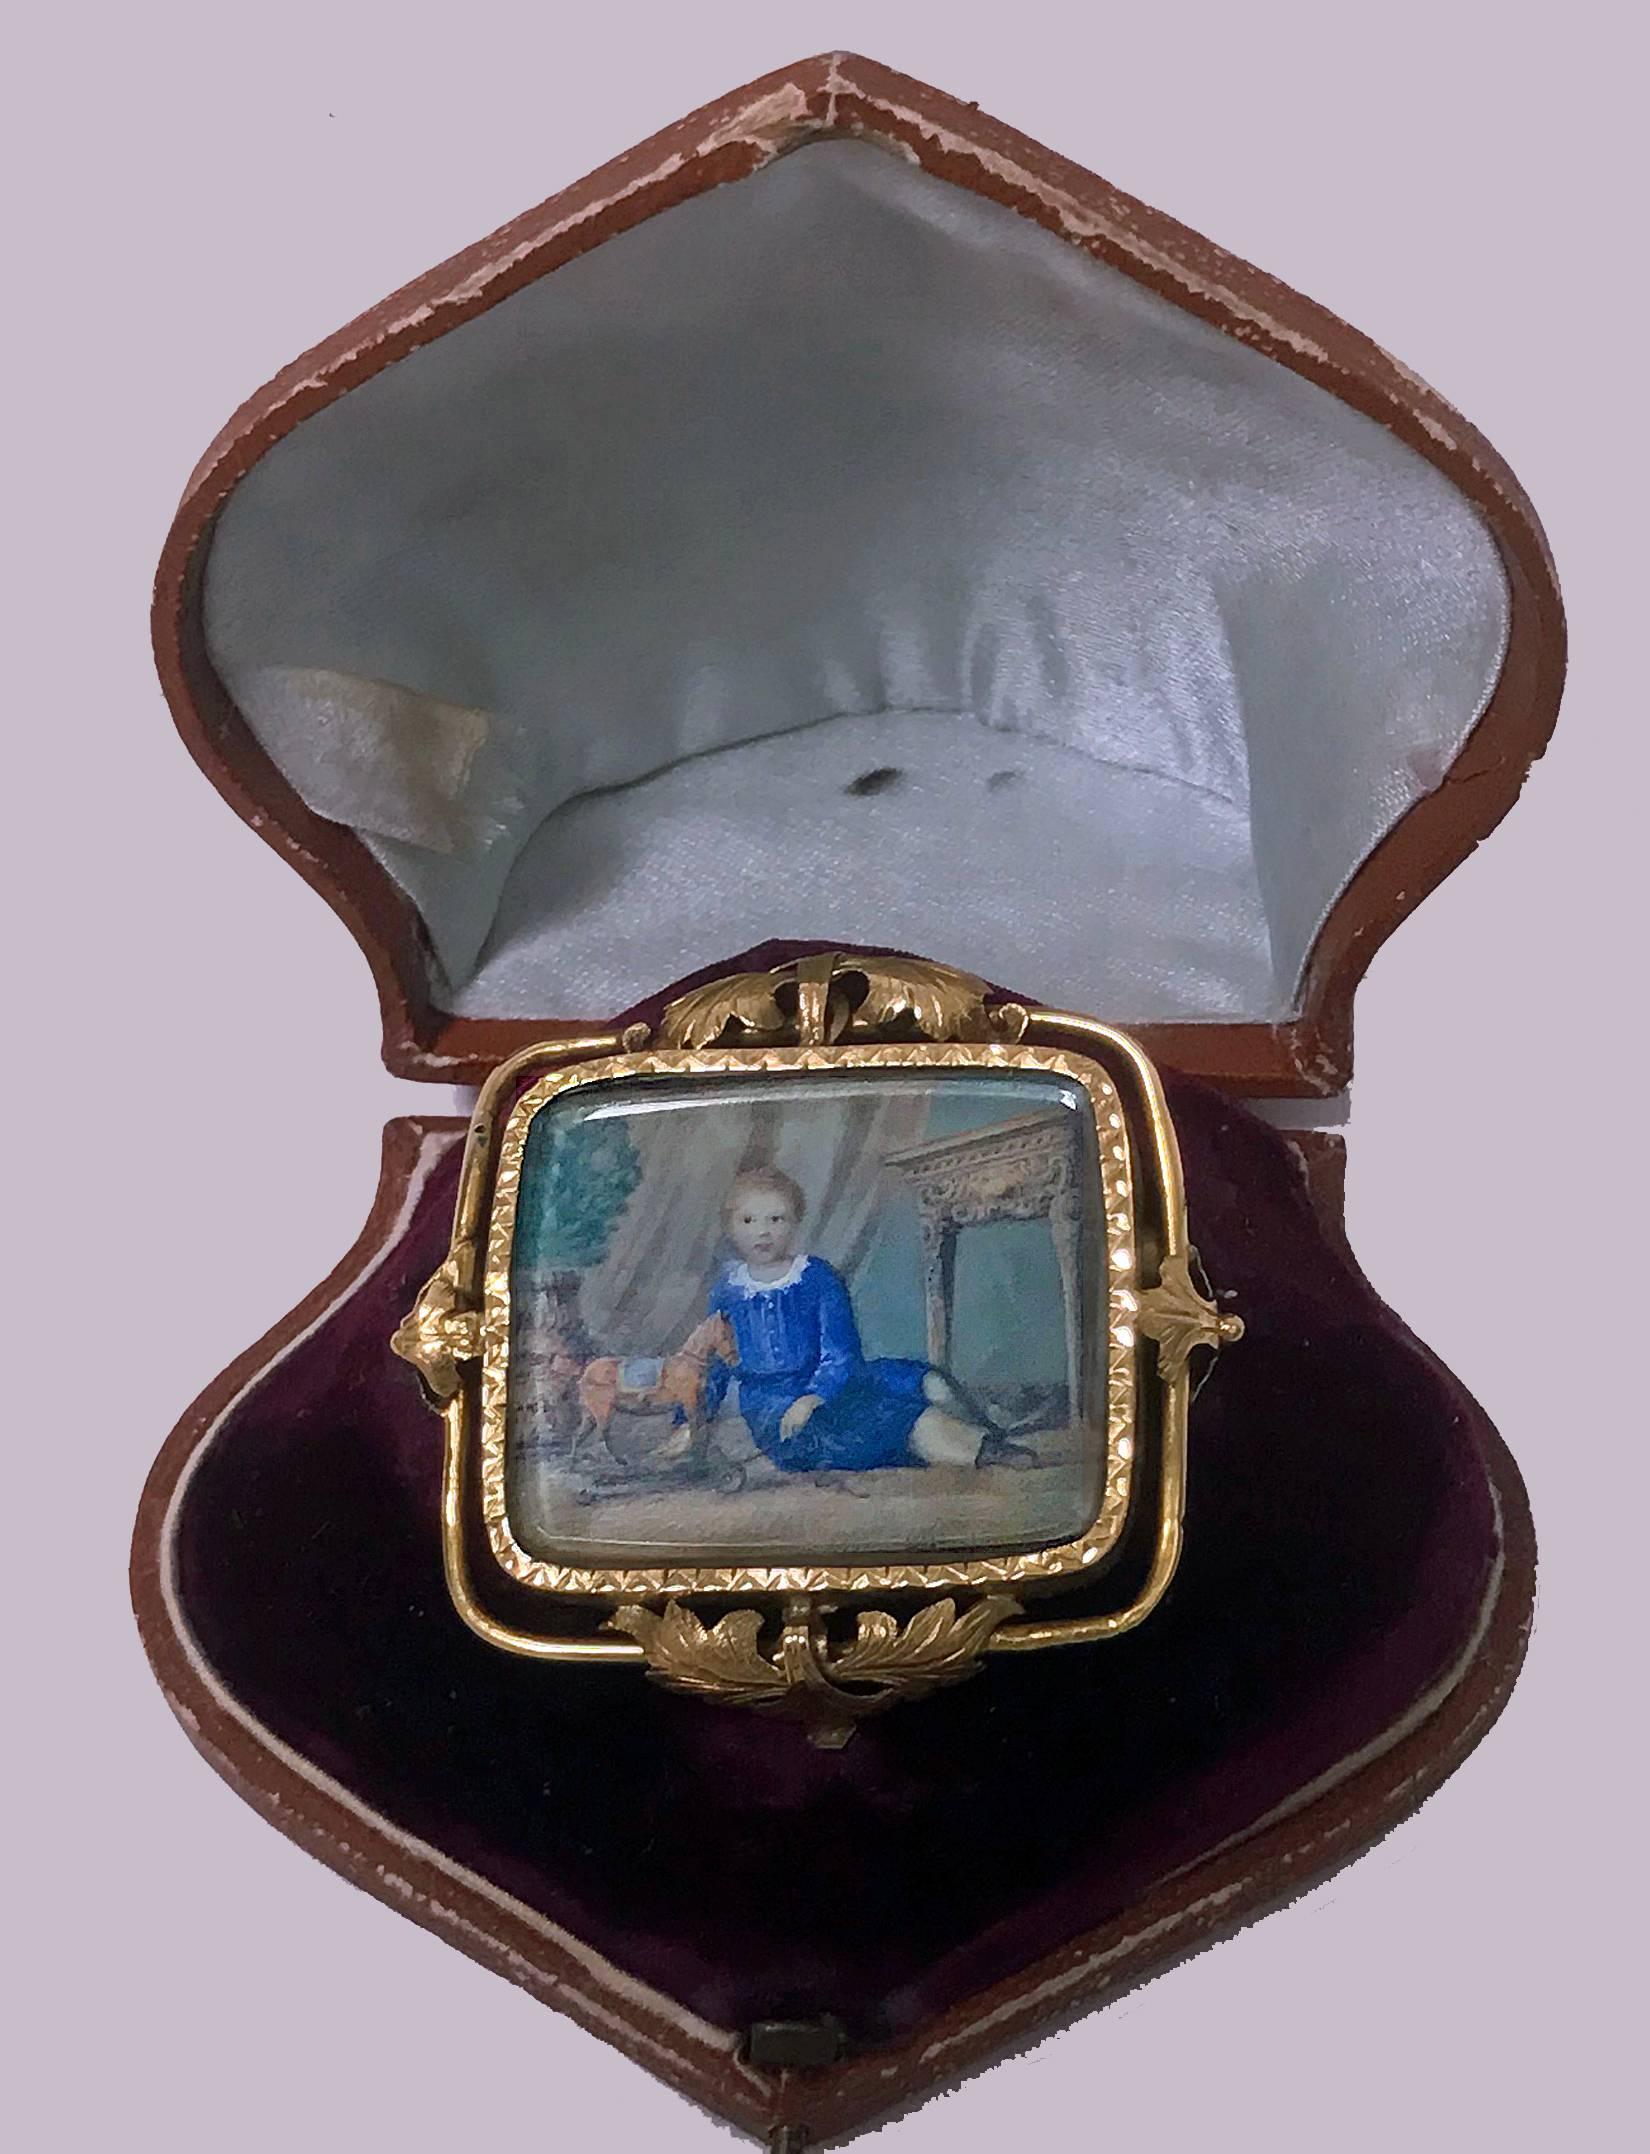 Antique Portrait Miniature original beveled crystal, Swiss, circa 1800, attributed to Anton Graff, depicting a boy with pull toy and orange tree, foliate gold (tests as 18-karat) frame (minor solder at reverse), fitted box. Anton Graff (1736-1813)